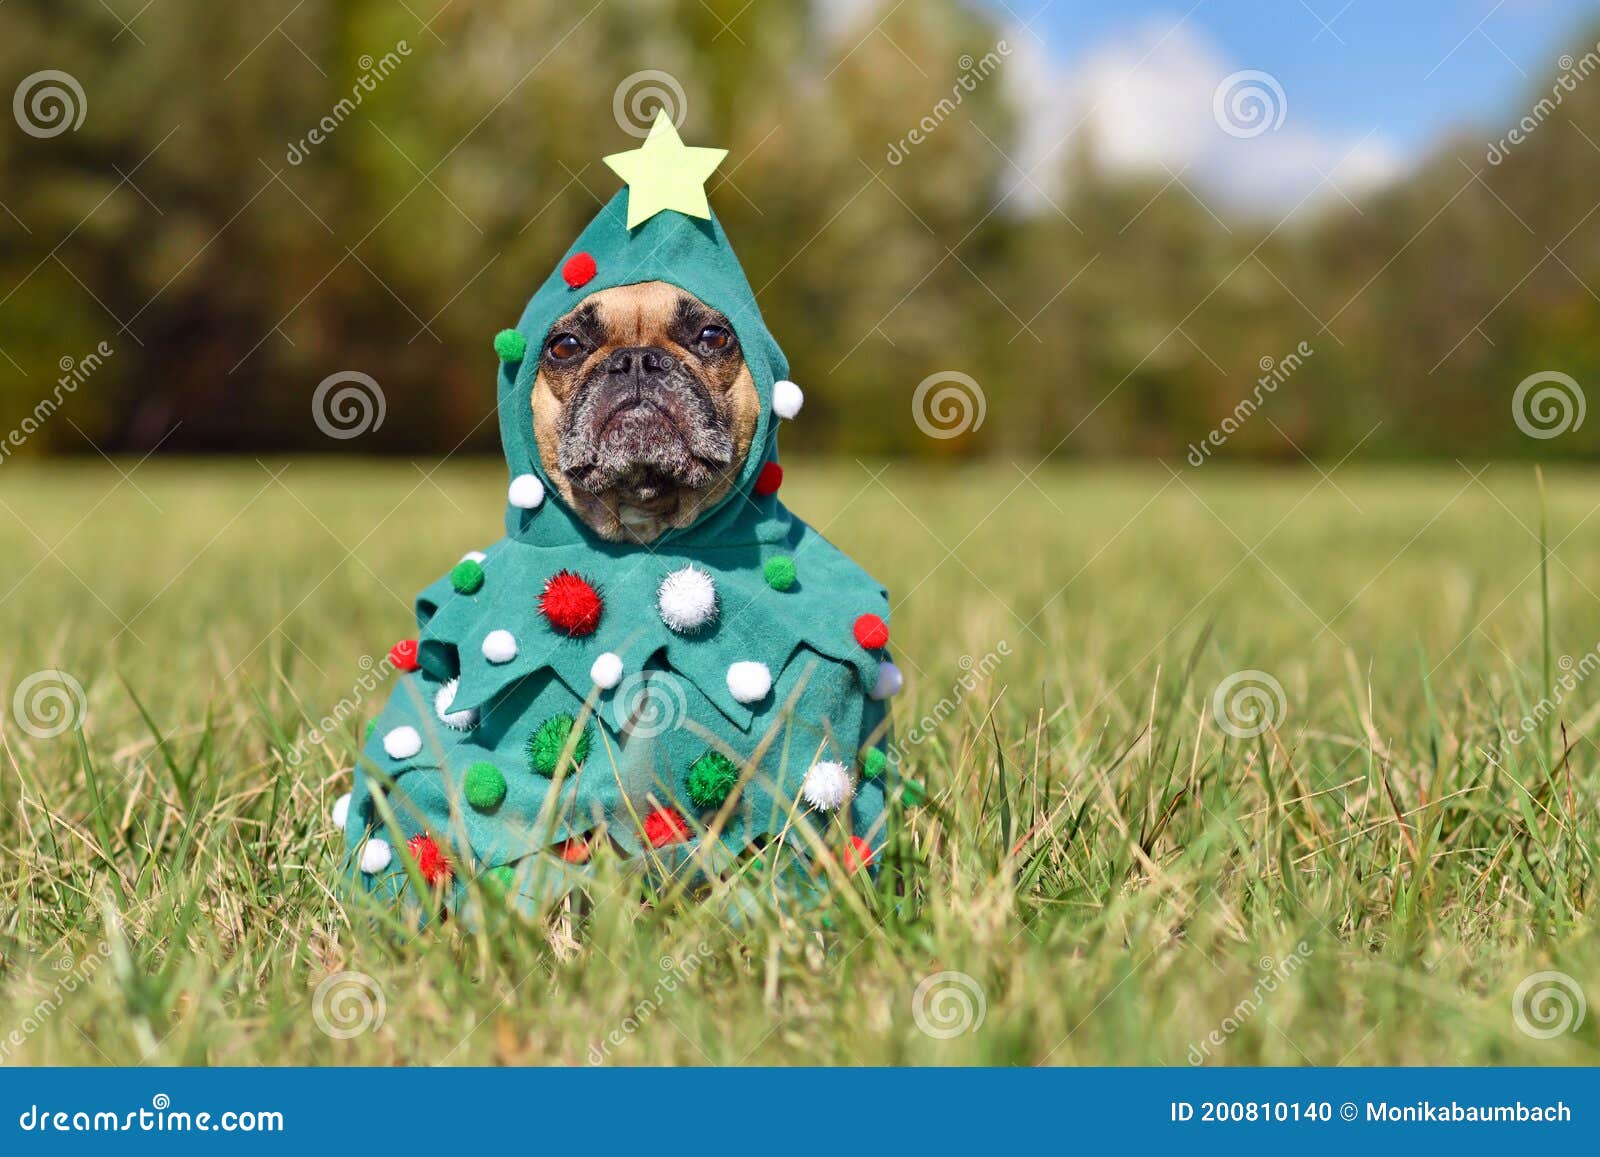 french bulldog dog wearing funny christmas tree costume with baubles and stars sitting on grass